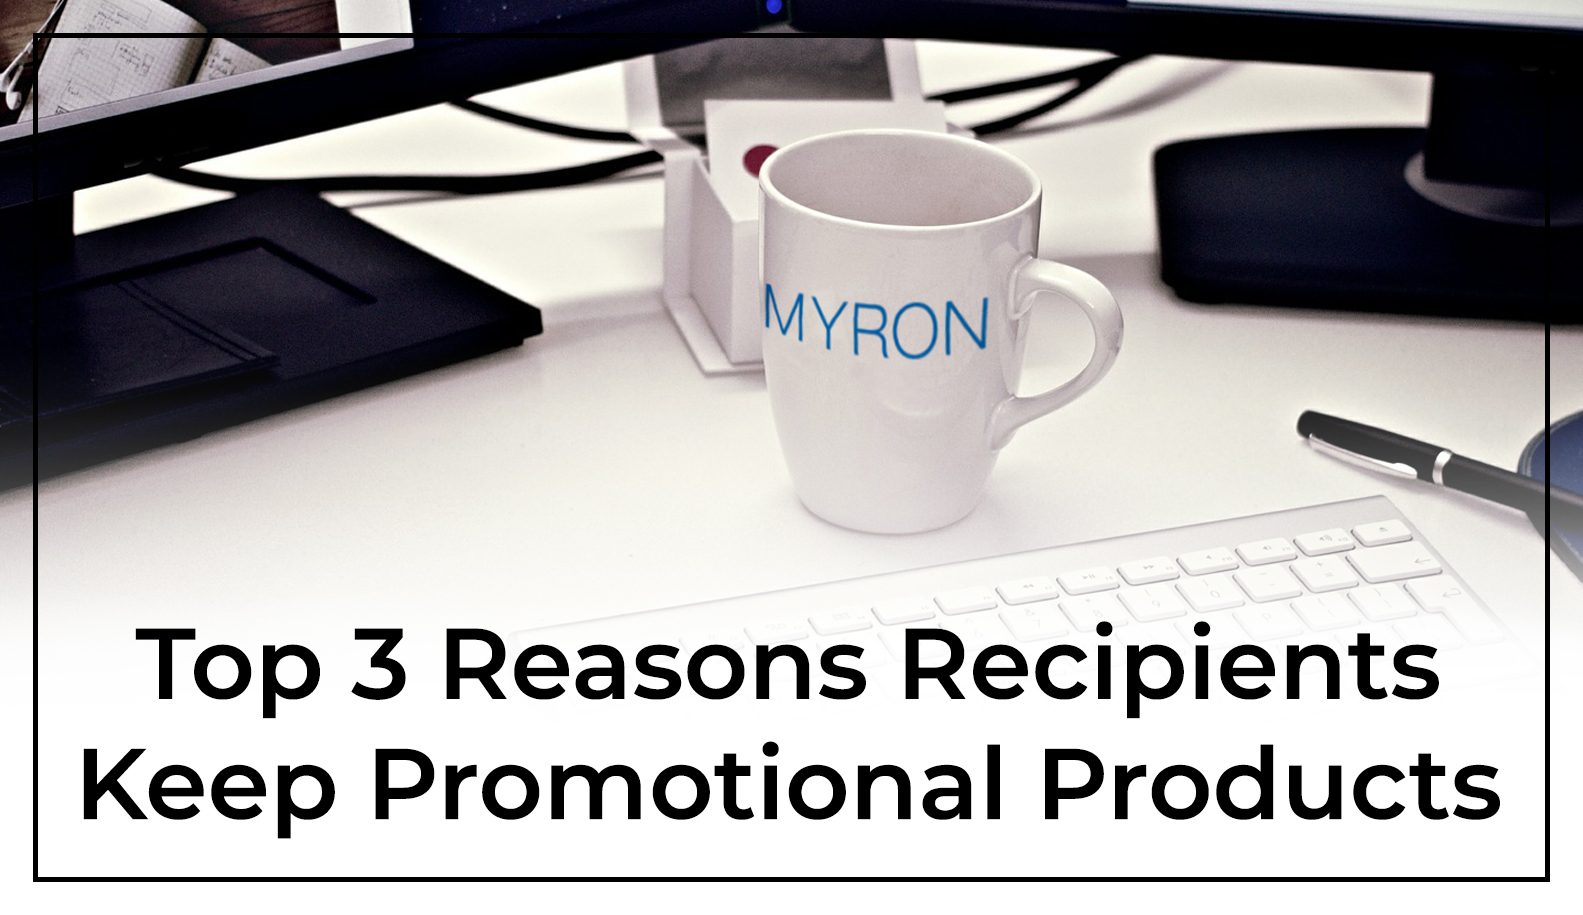 Why Keep Promotional Products